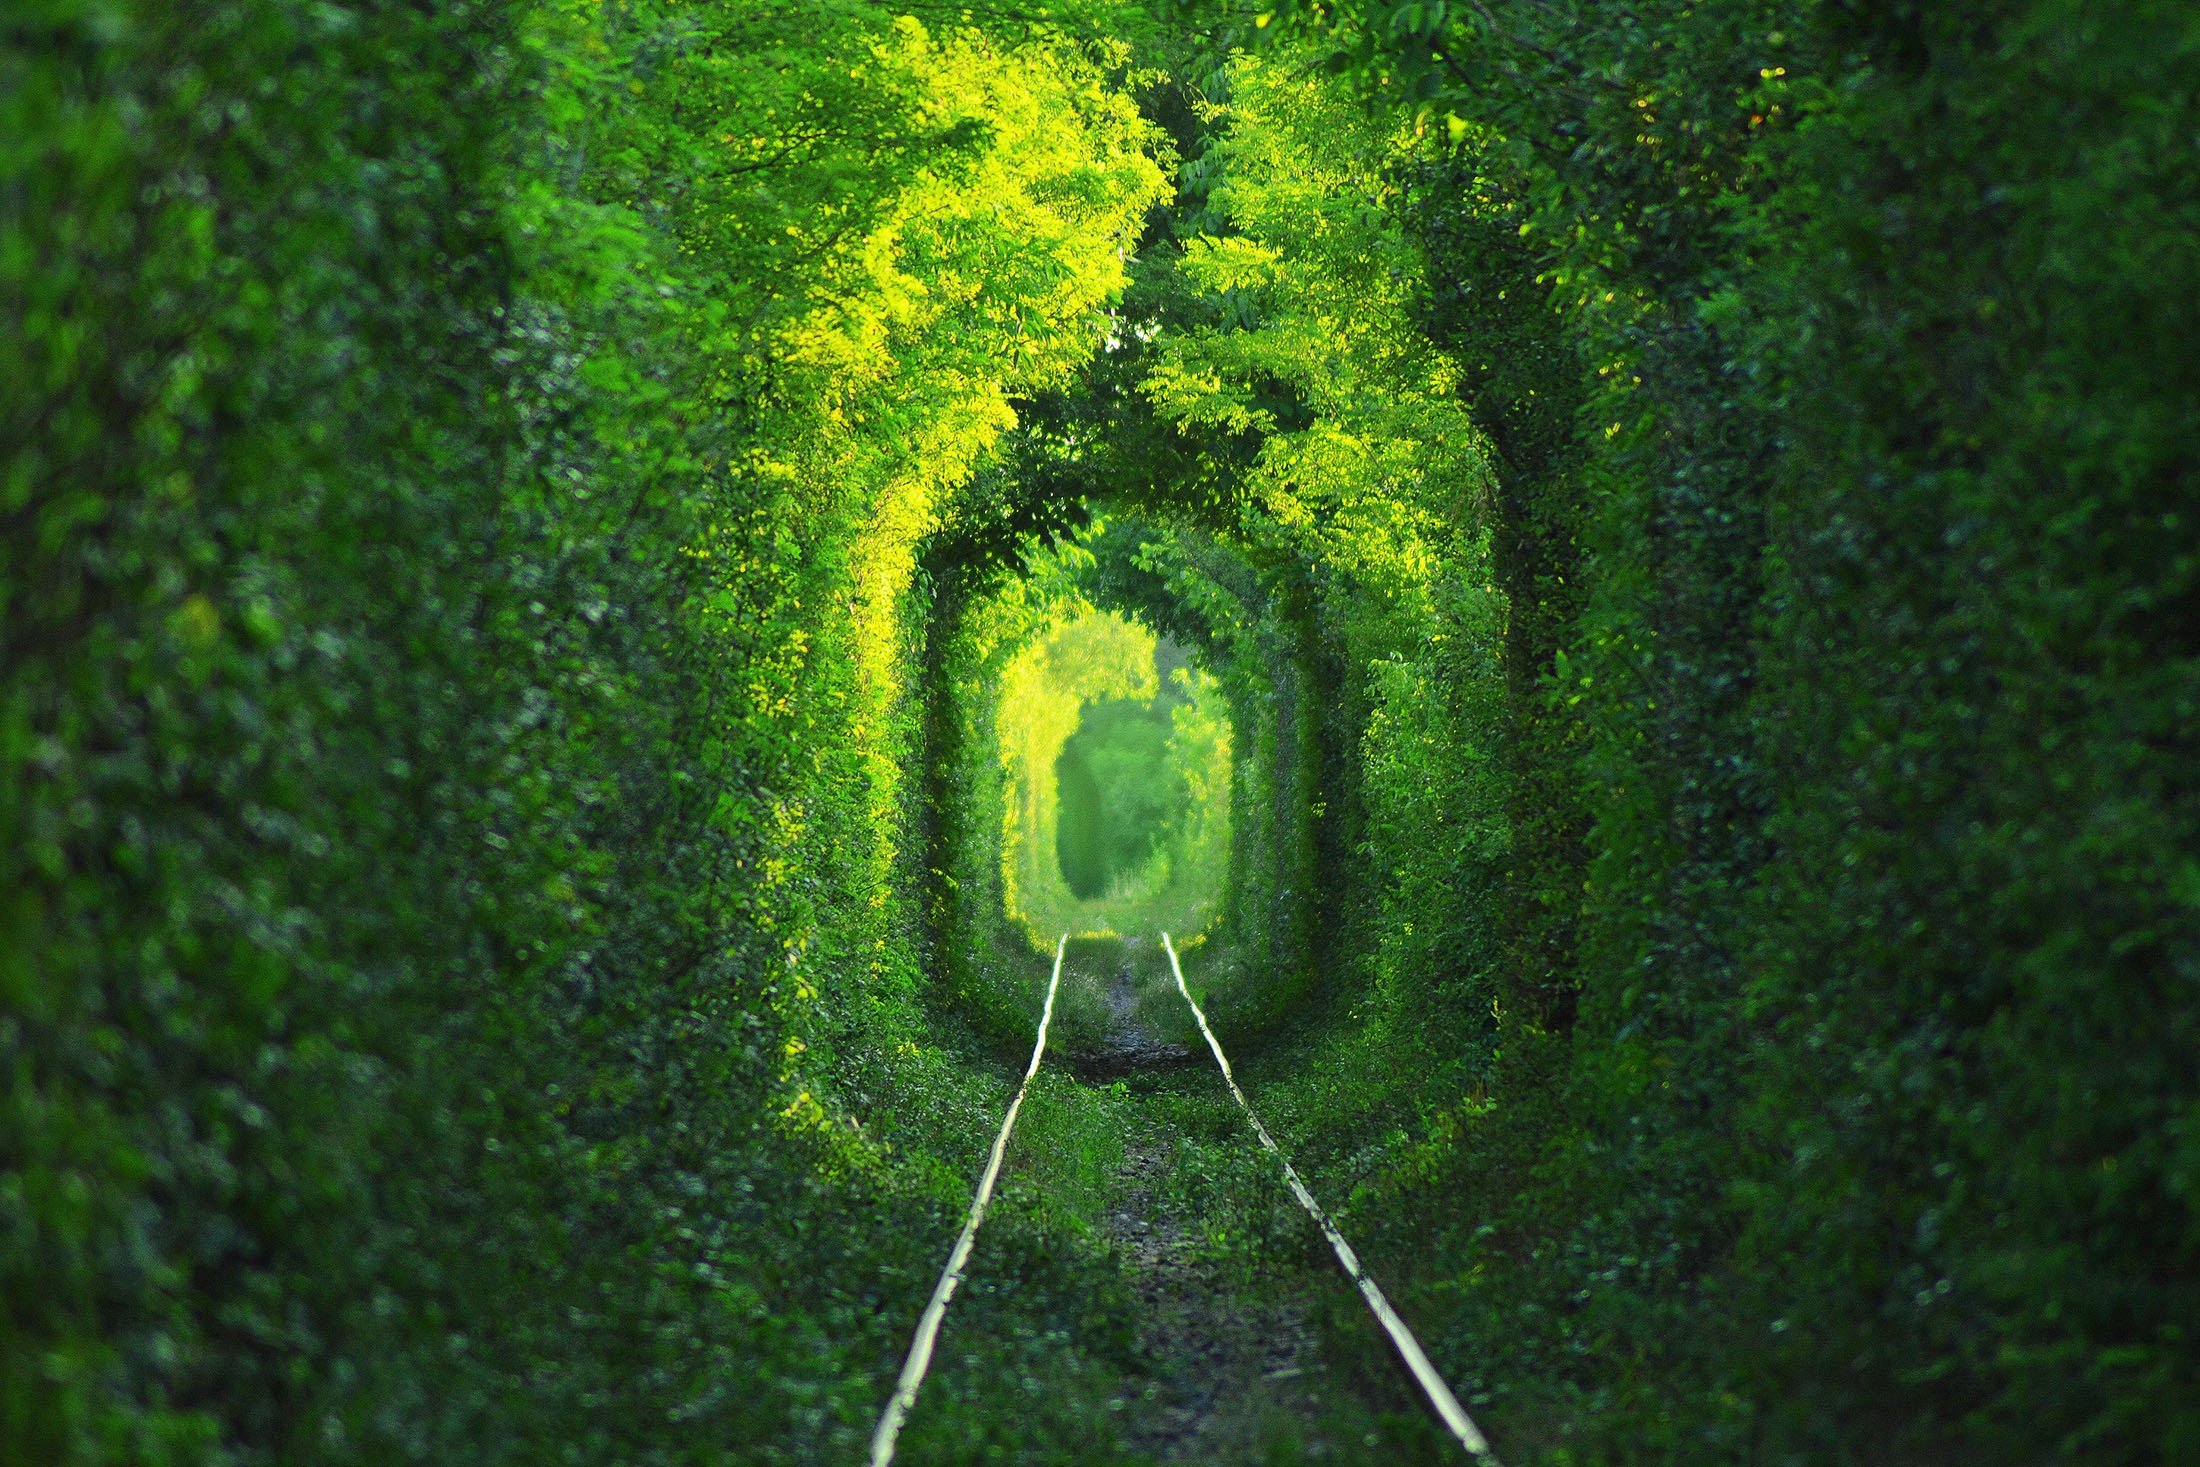 The Tunnel of Love is a stretch of industrial railway located near Klevan, Ukraine, which connects it to Orzhiv, surrounded by green arches.  (Photo Shutterstock)